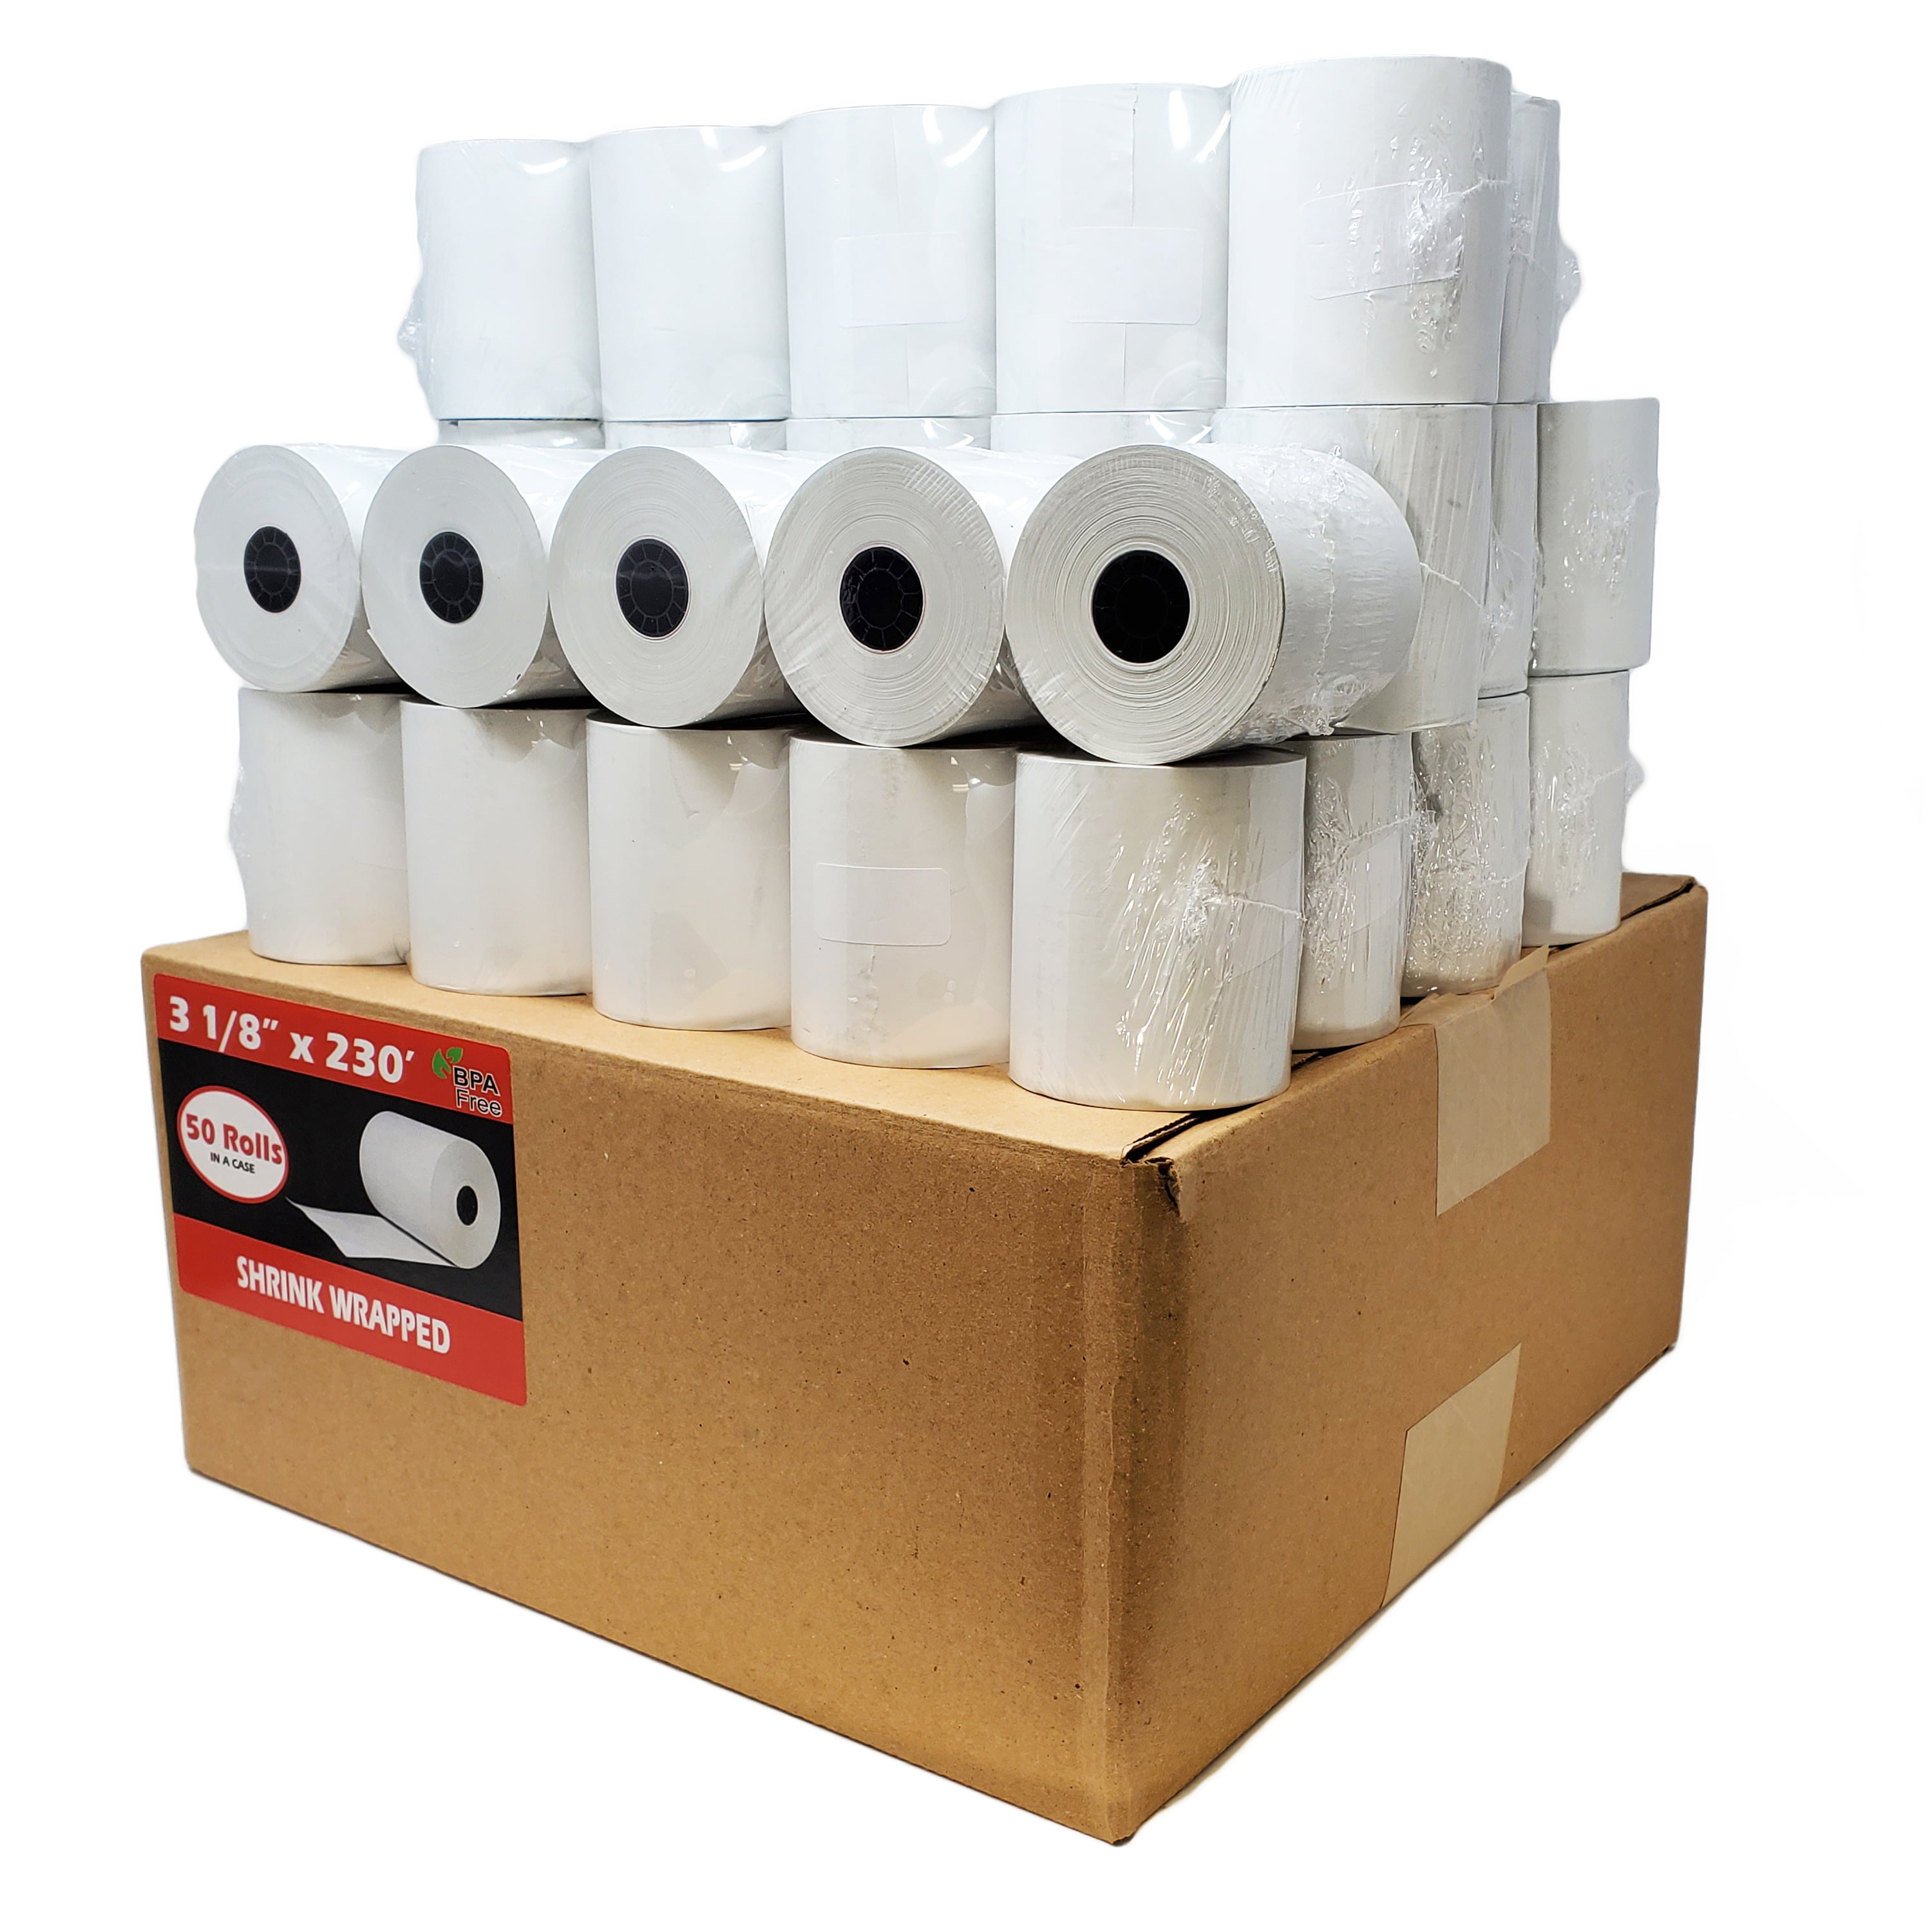 32 Pack Super Saver Pack from RegisterRoll Thermal Cash Register POS Paper Rolls 3 1/8 x 230 Made in USA 